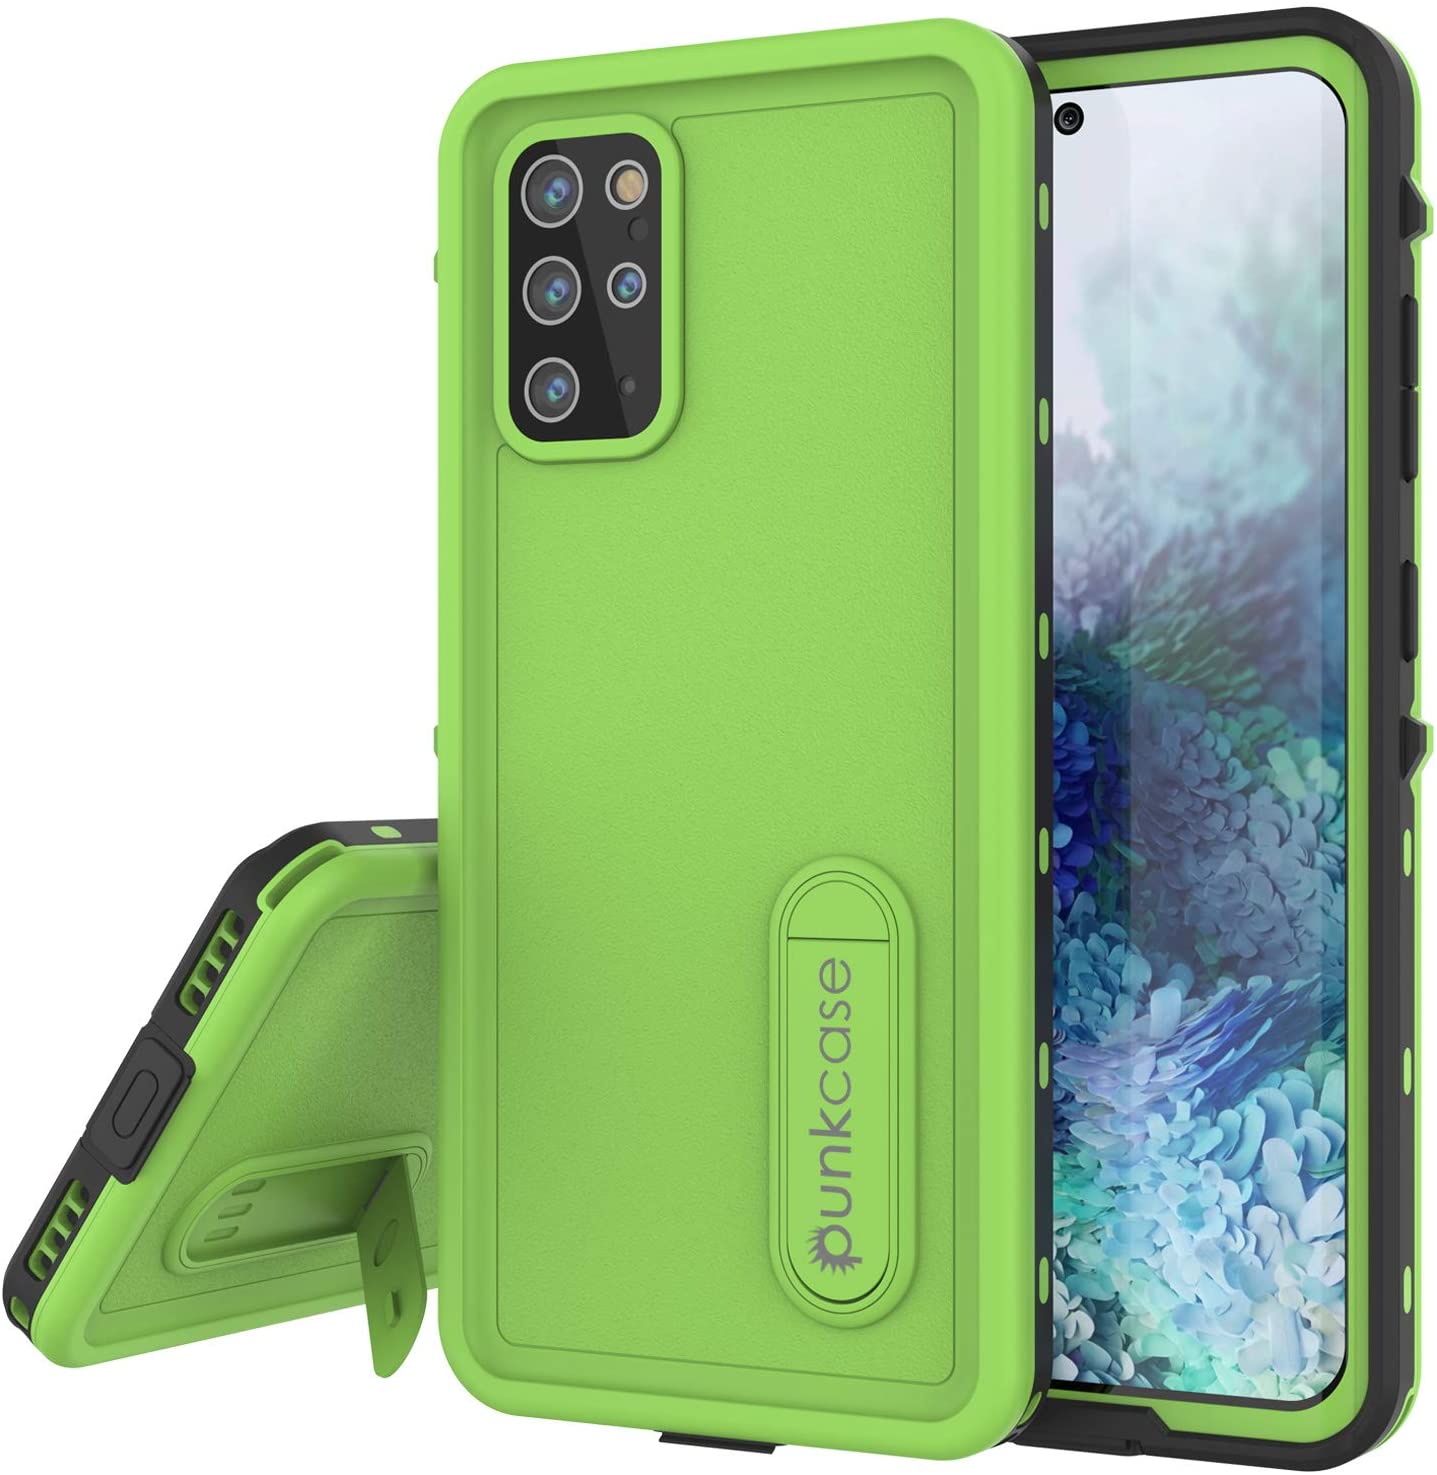 Galaxy S20+ Plus Waterproof Case, Punkcase [KickStud Series] Armor Cover [Light Green] (Color in image: Light Green)